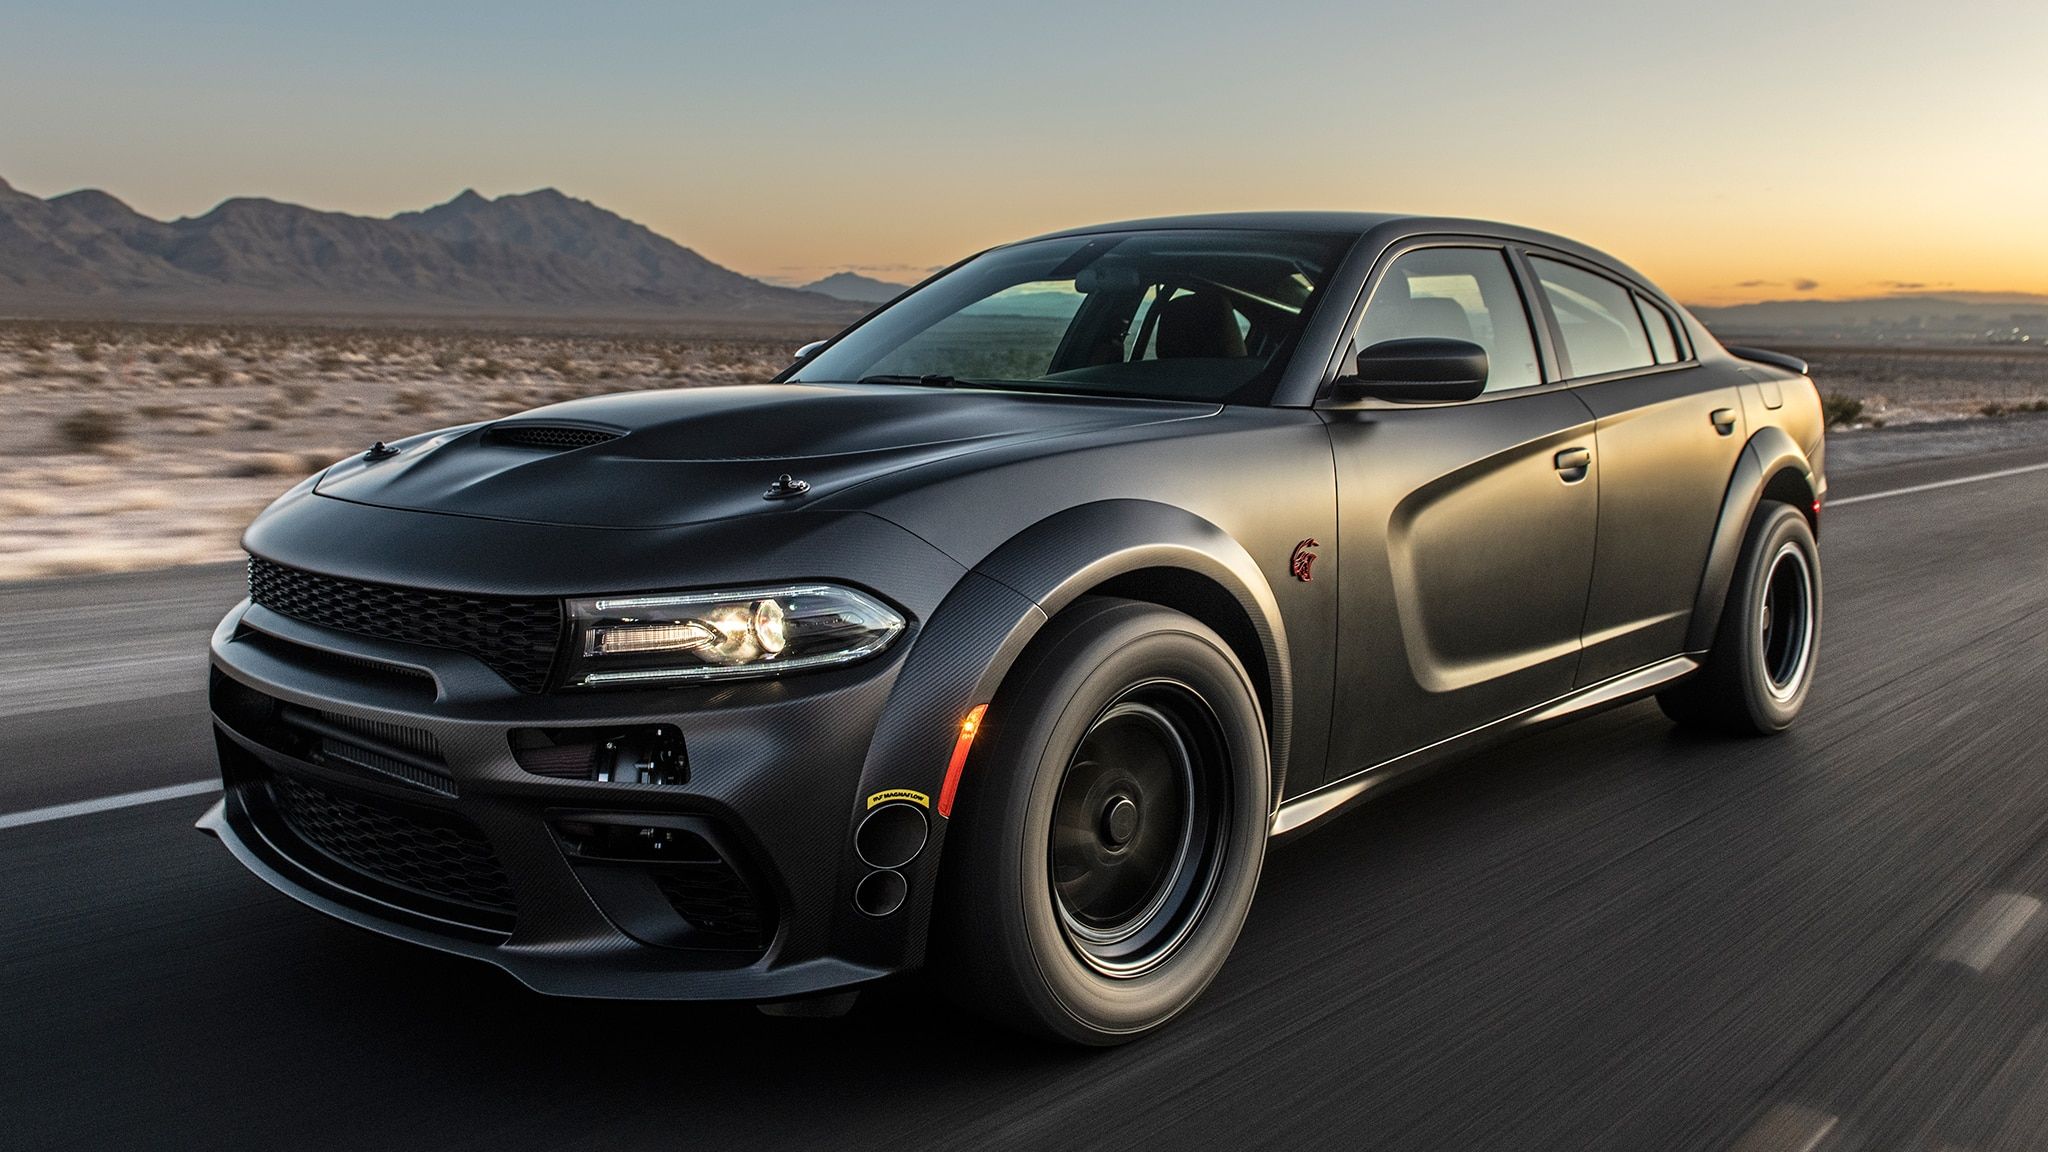 The Ultimate Dodge Charger: 1525 HP, Twin Turbo, Widebody, AWD!